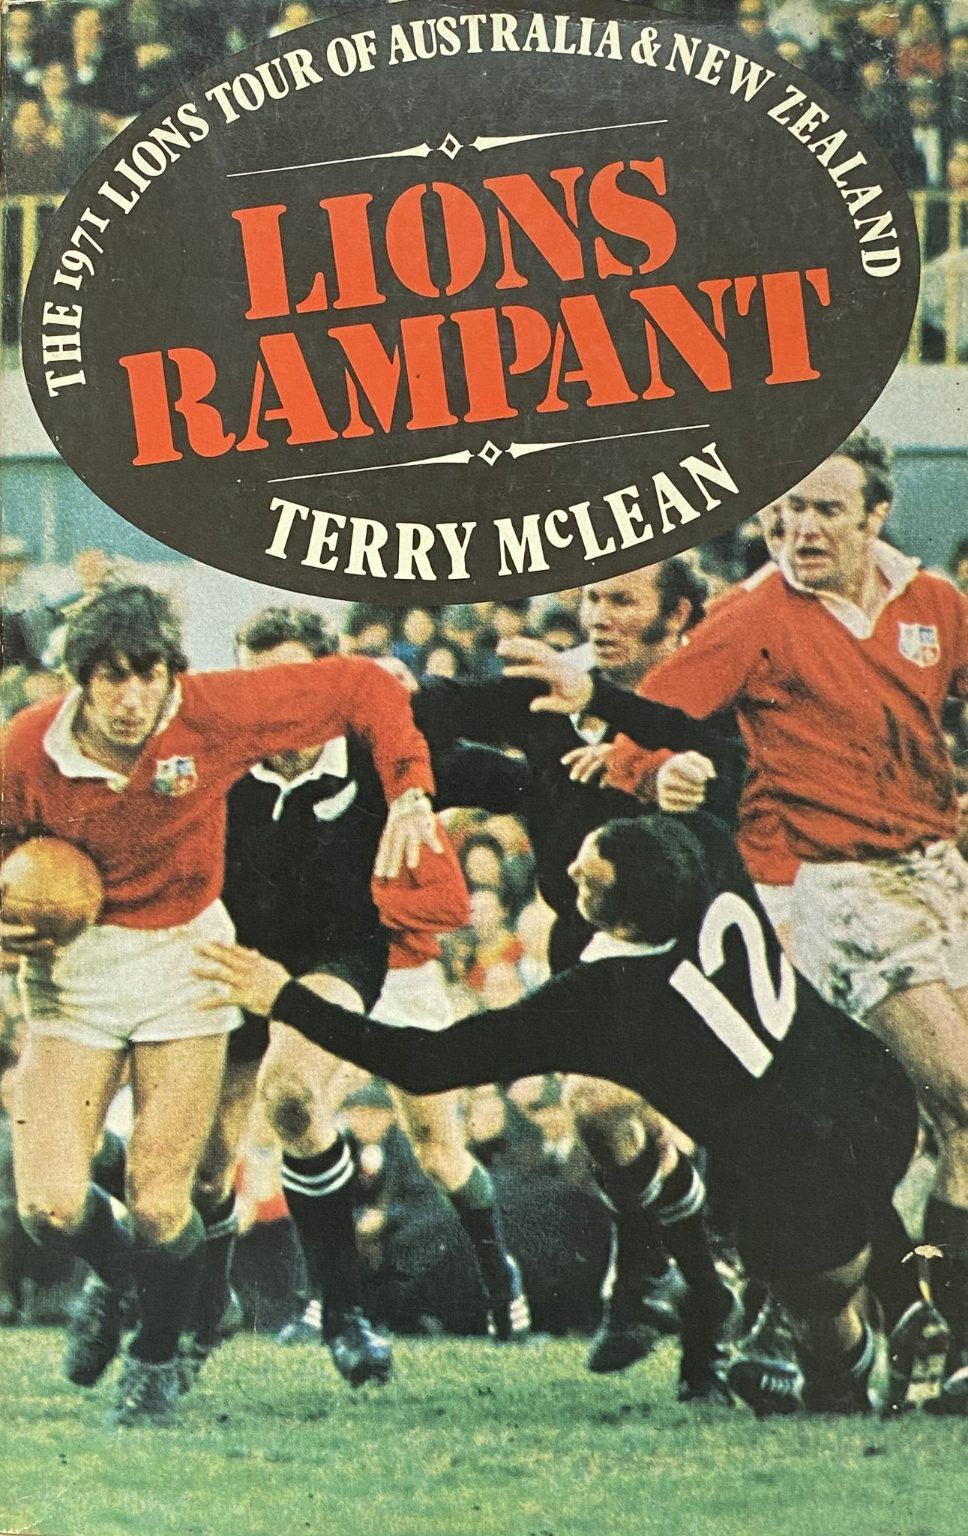 LIONS RAMPANT: The 1971 Lions tour of Australia and New Zealand